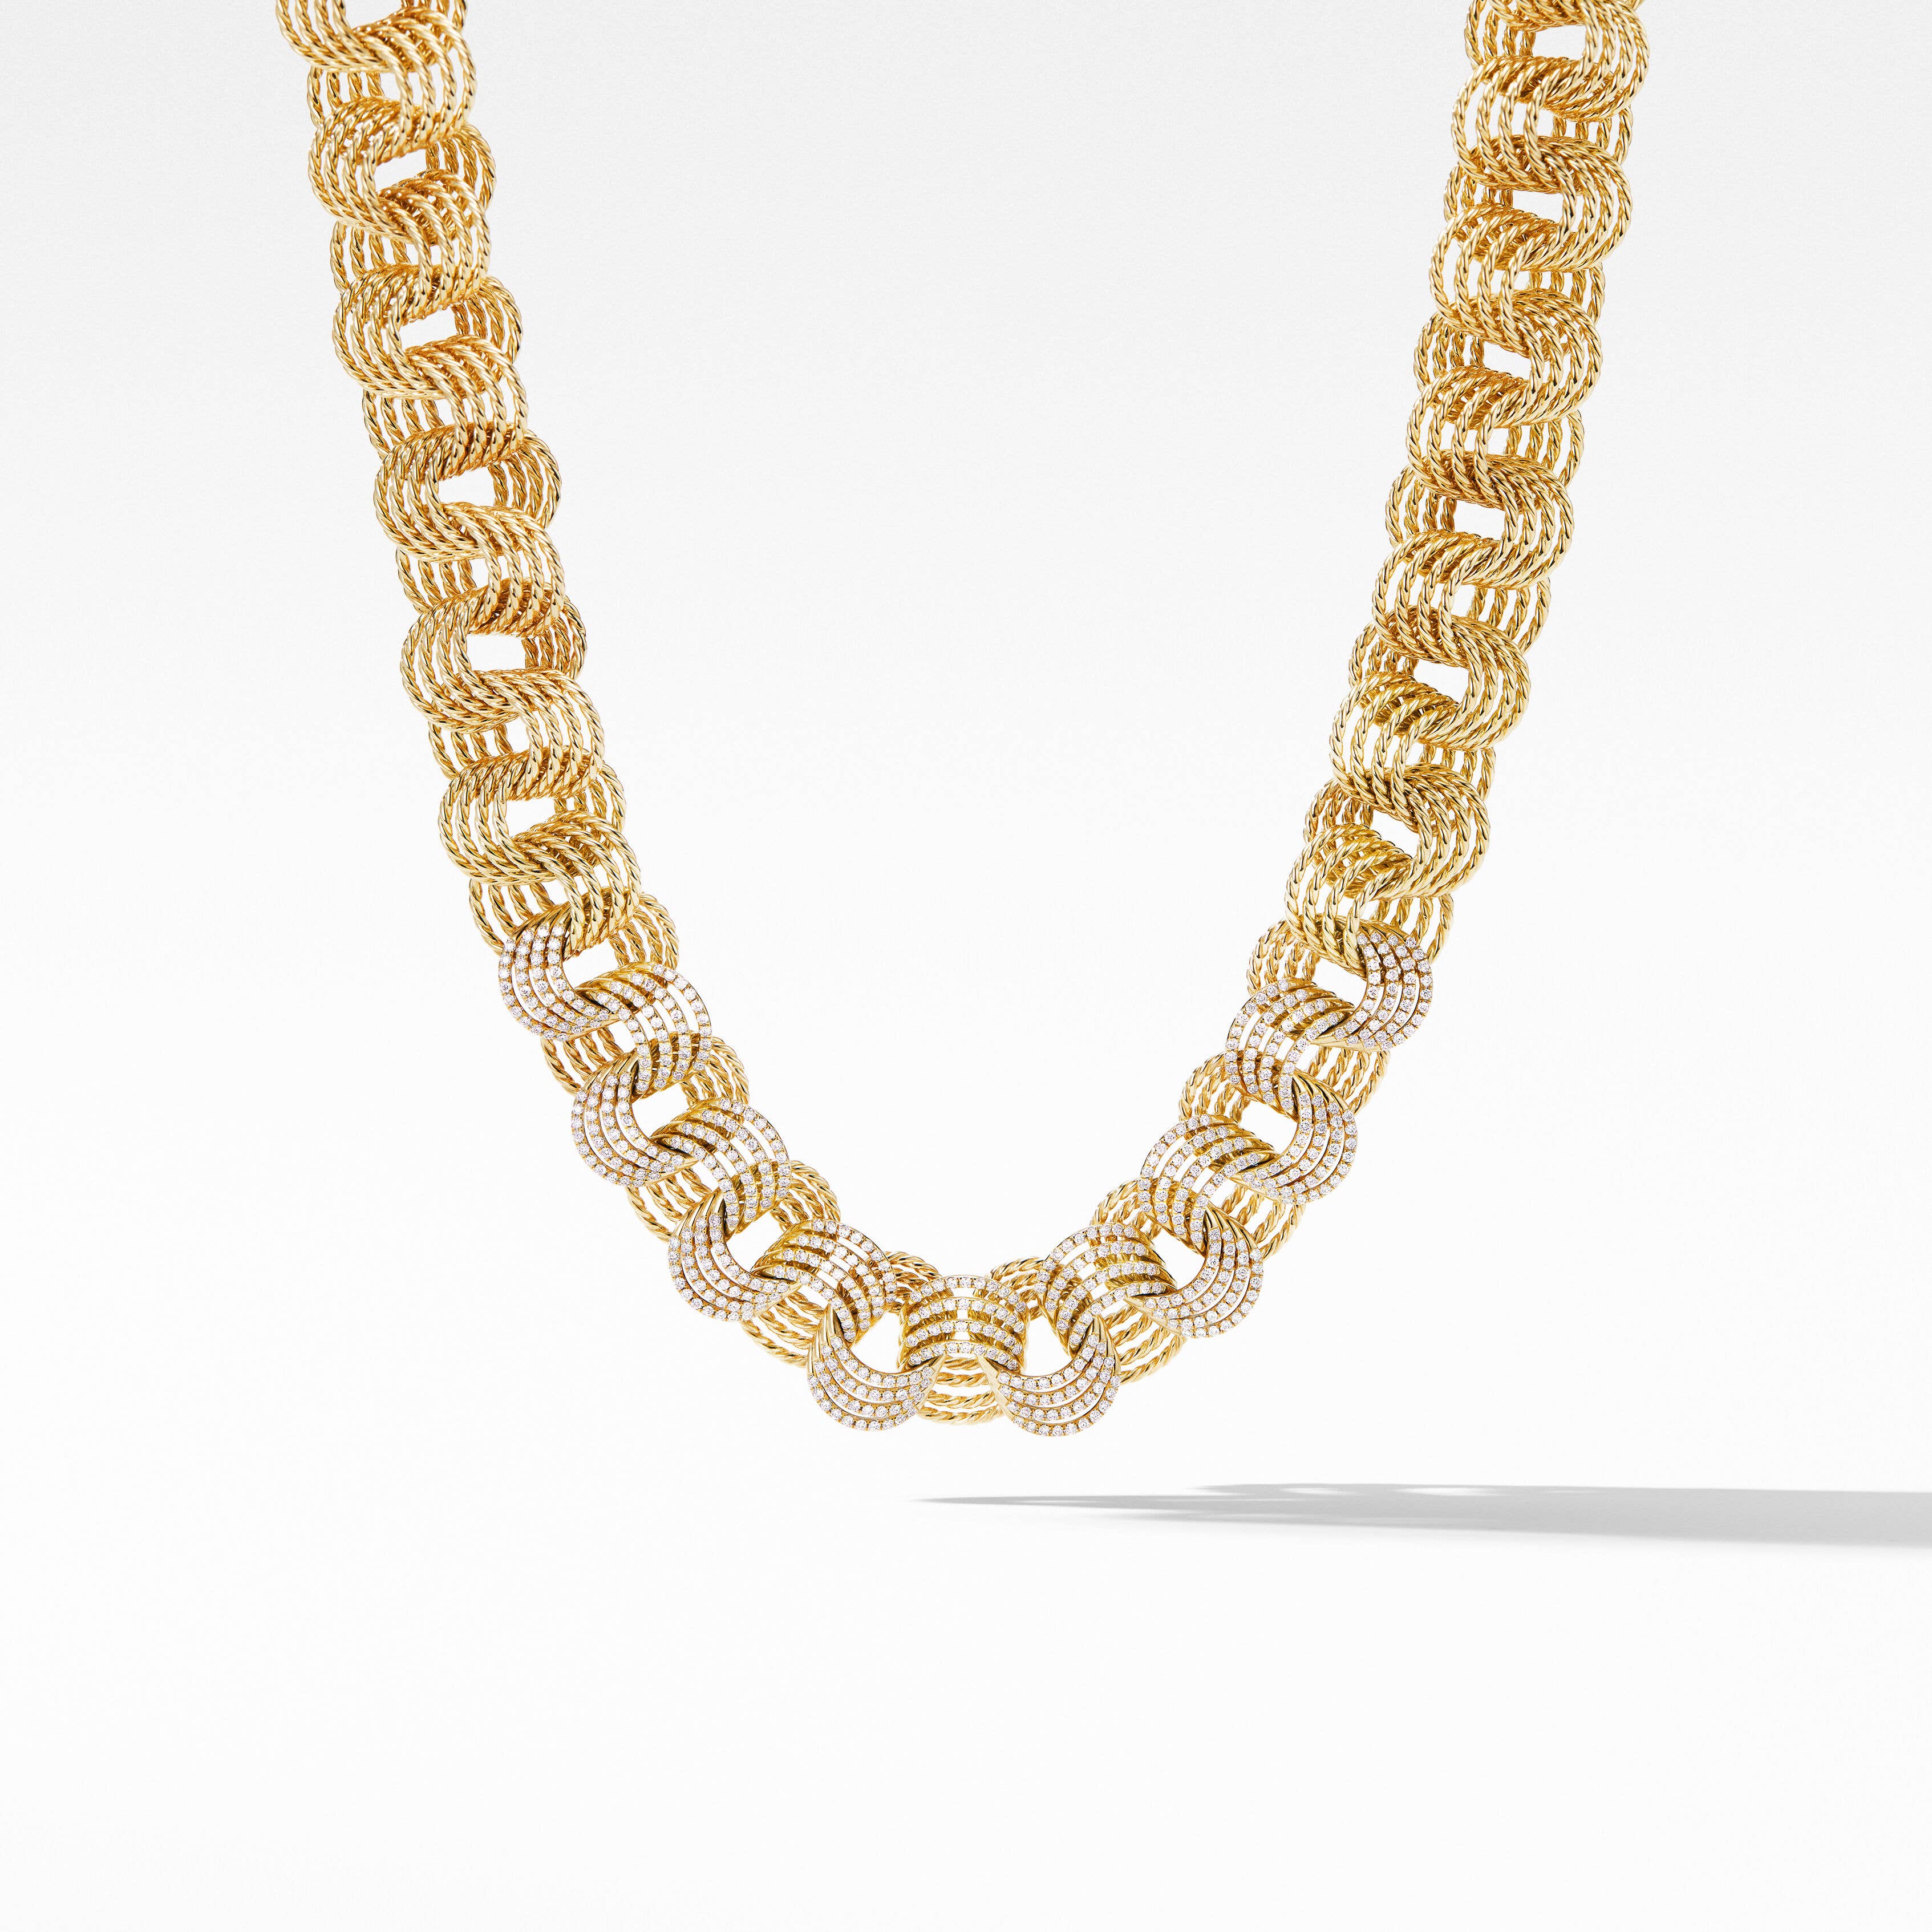 DY Origami Linked Necklace in 18K Yellow Gold with Pavé Diamonds